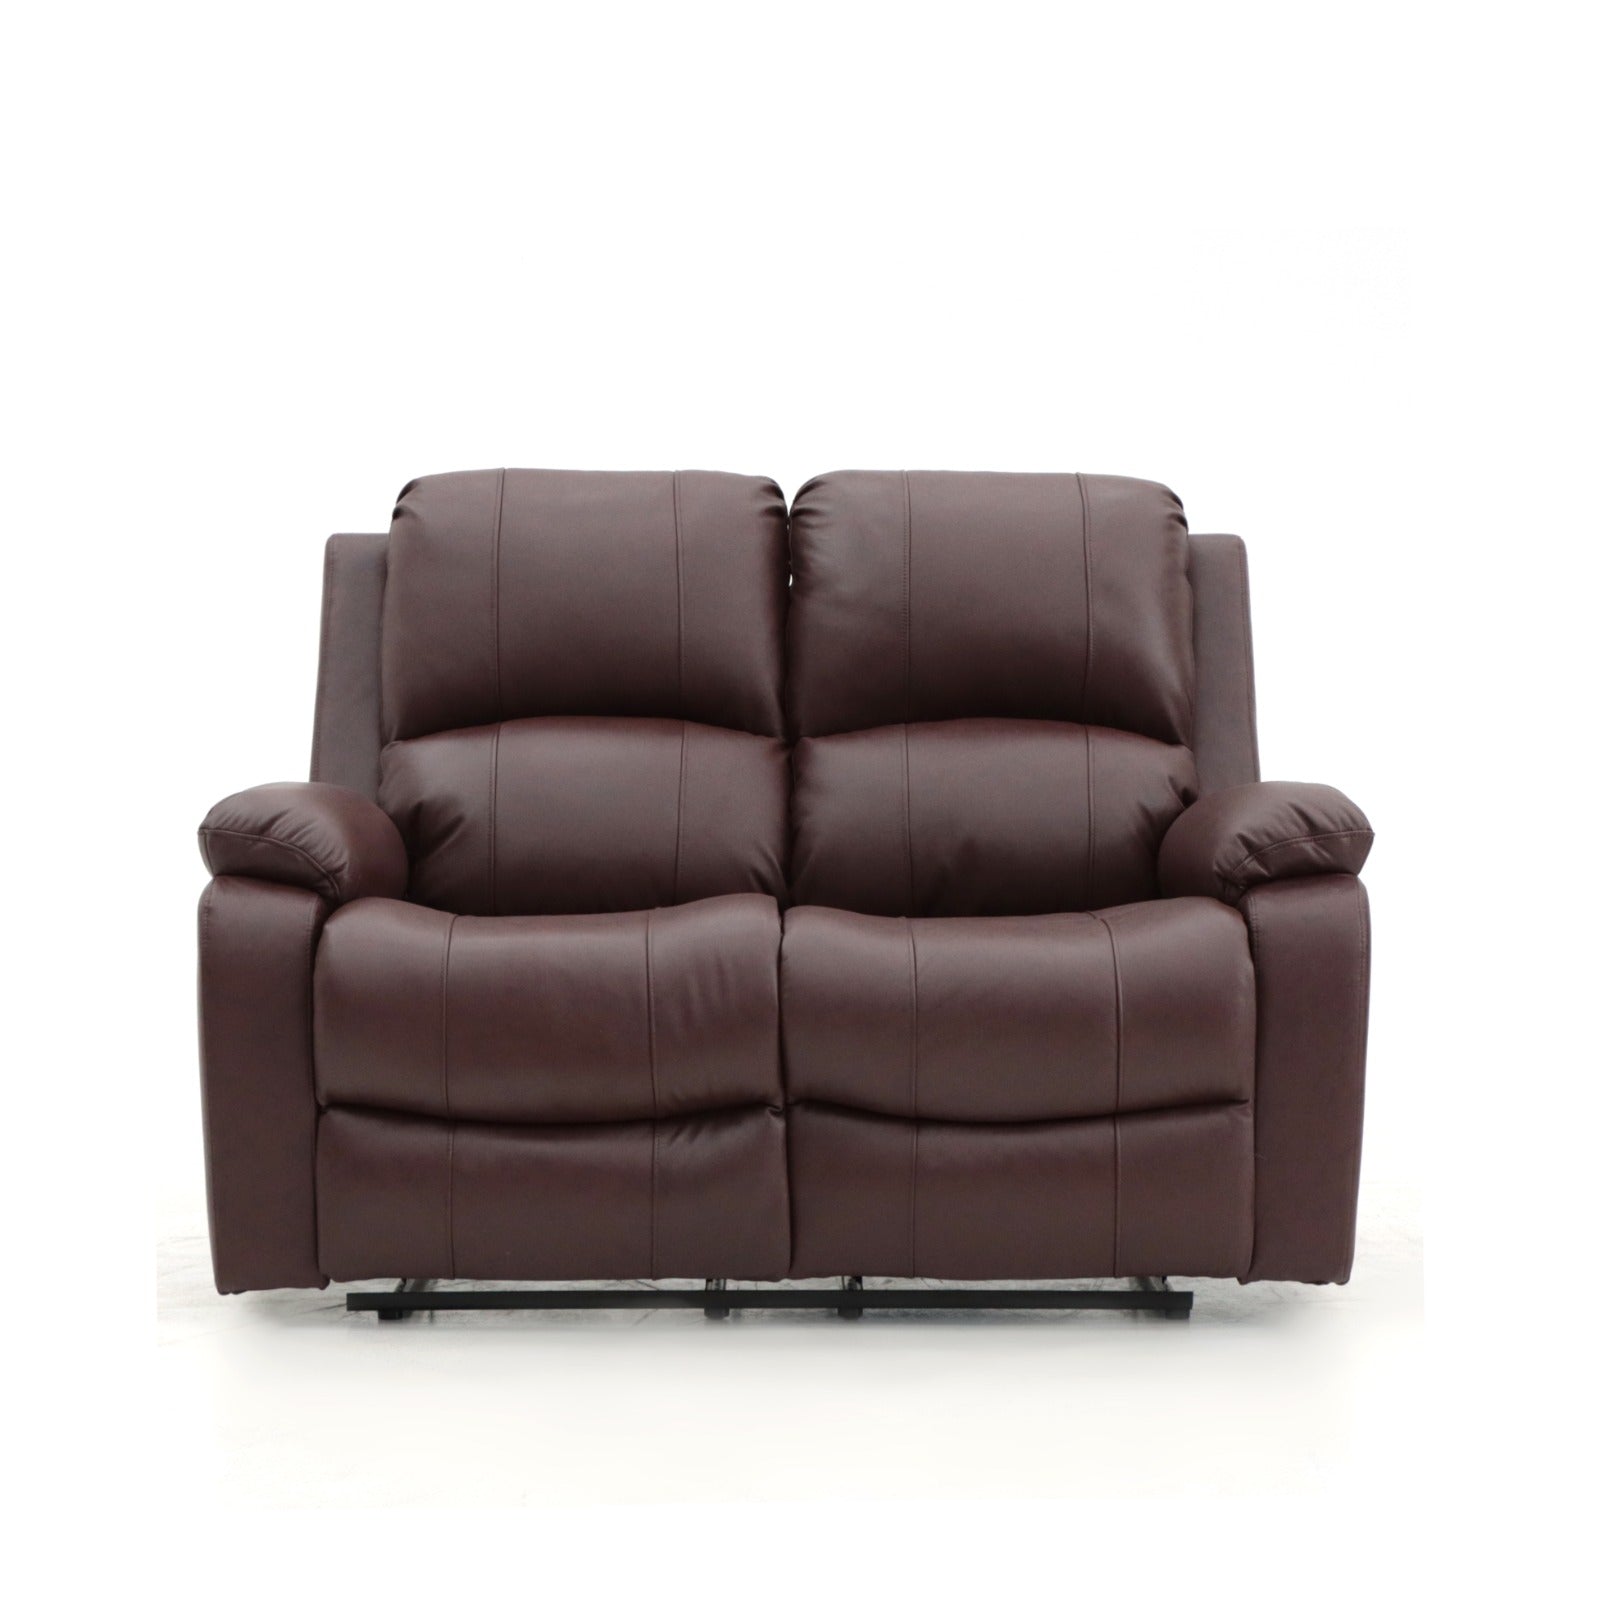 Aston 3 Seater and 2 Seater Manual Recliner Chesnut Leather